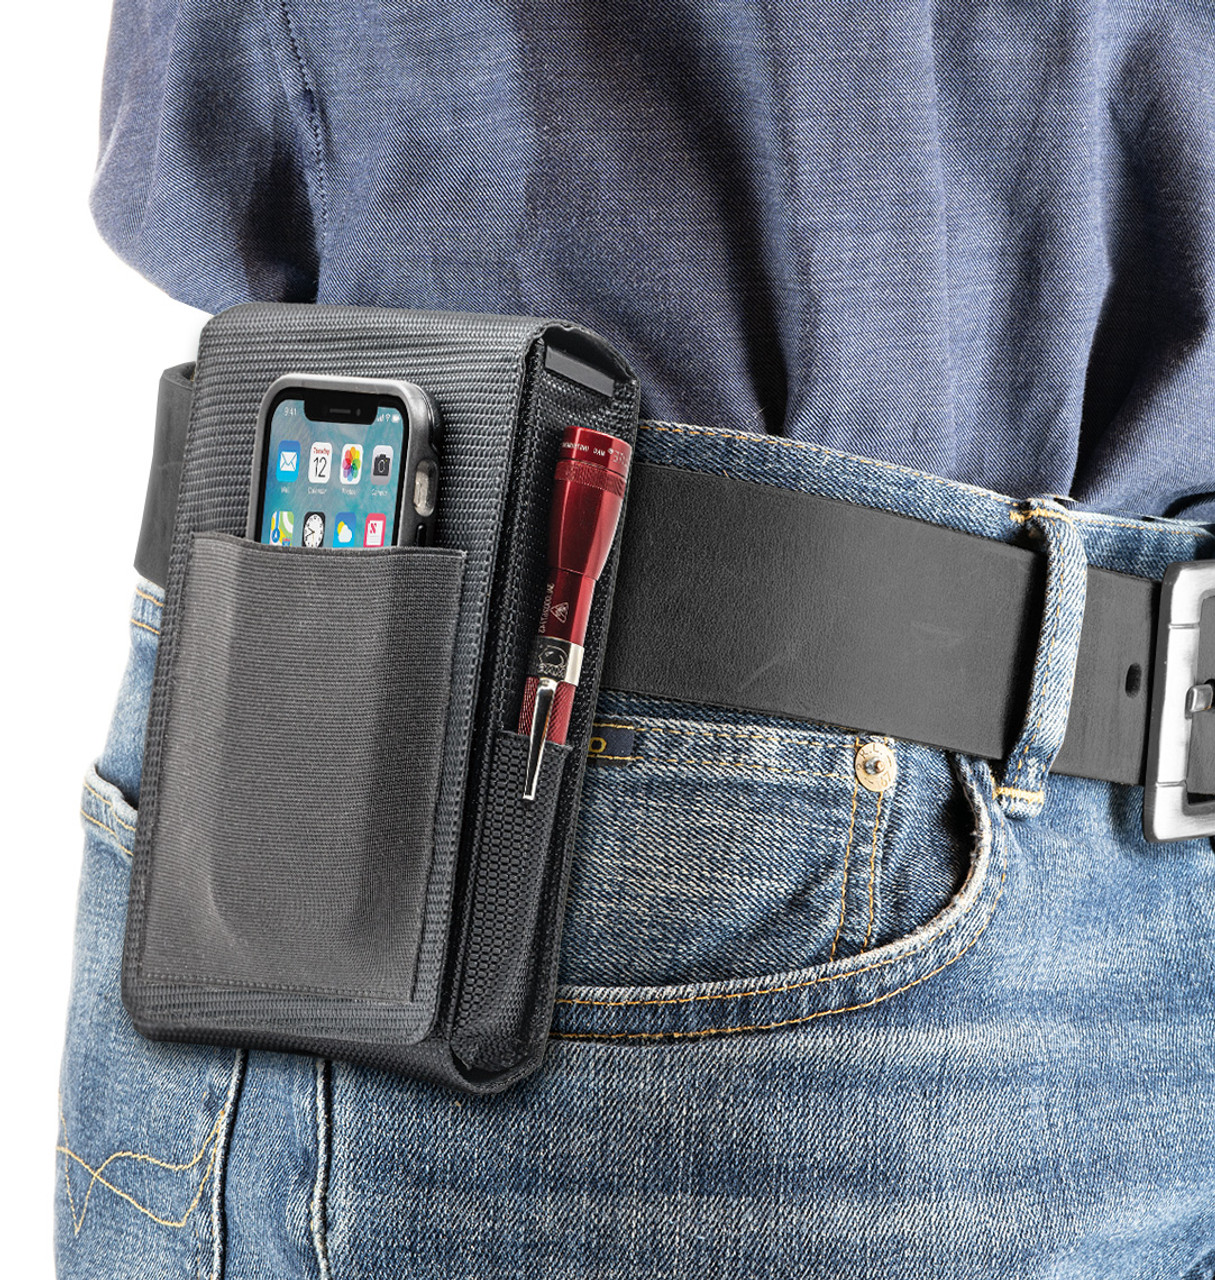 The Kimber Ultra Carry Perfect Holster